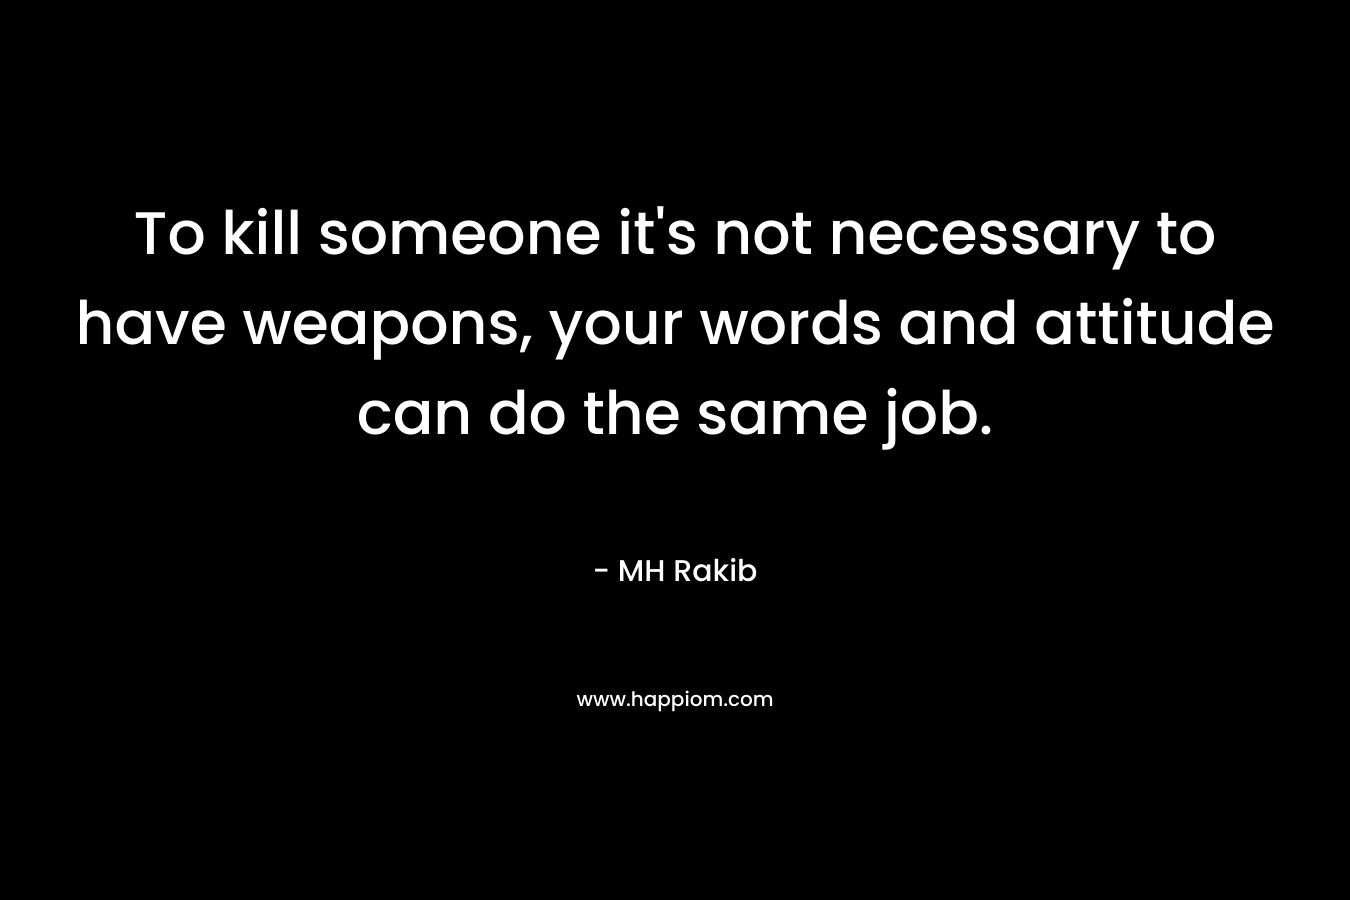 To kill someone it's not necessary to have weapons, your words and attitude can do the same job.